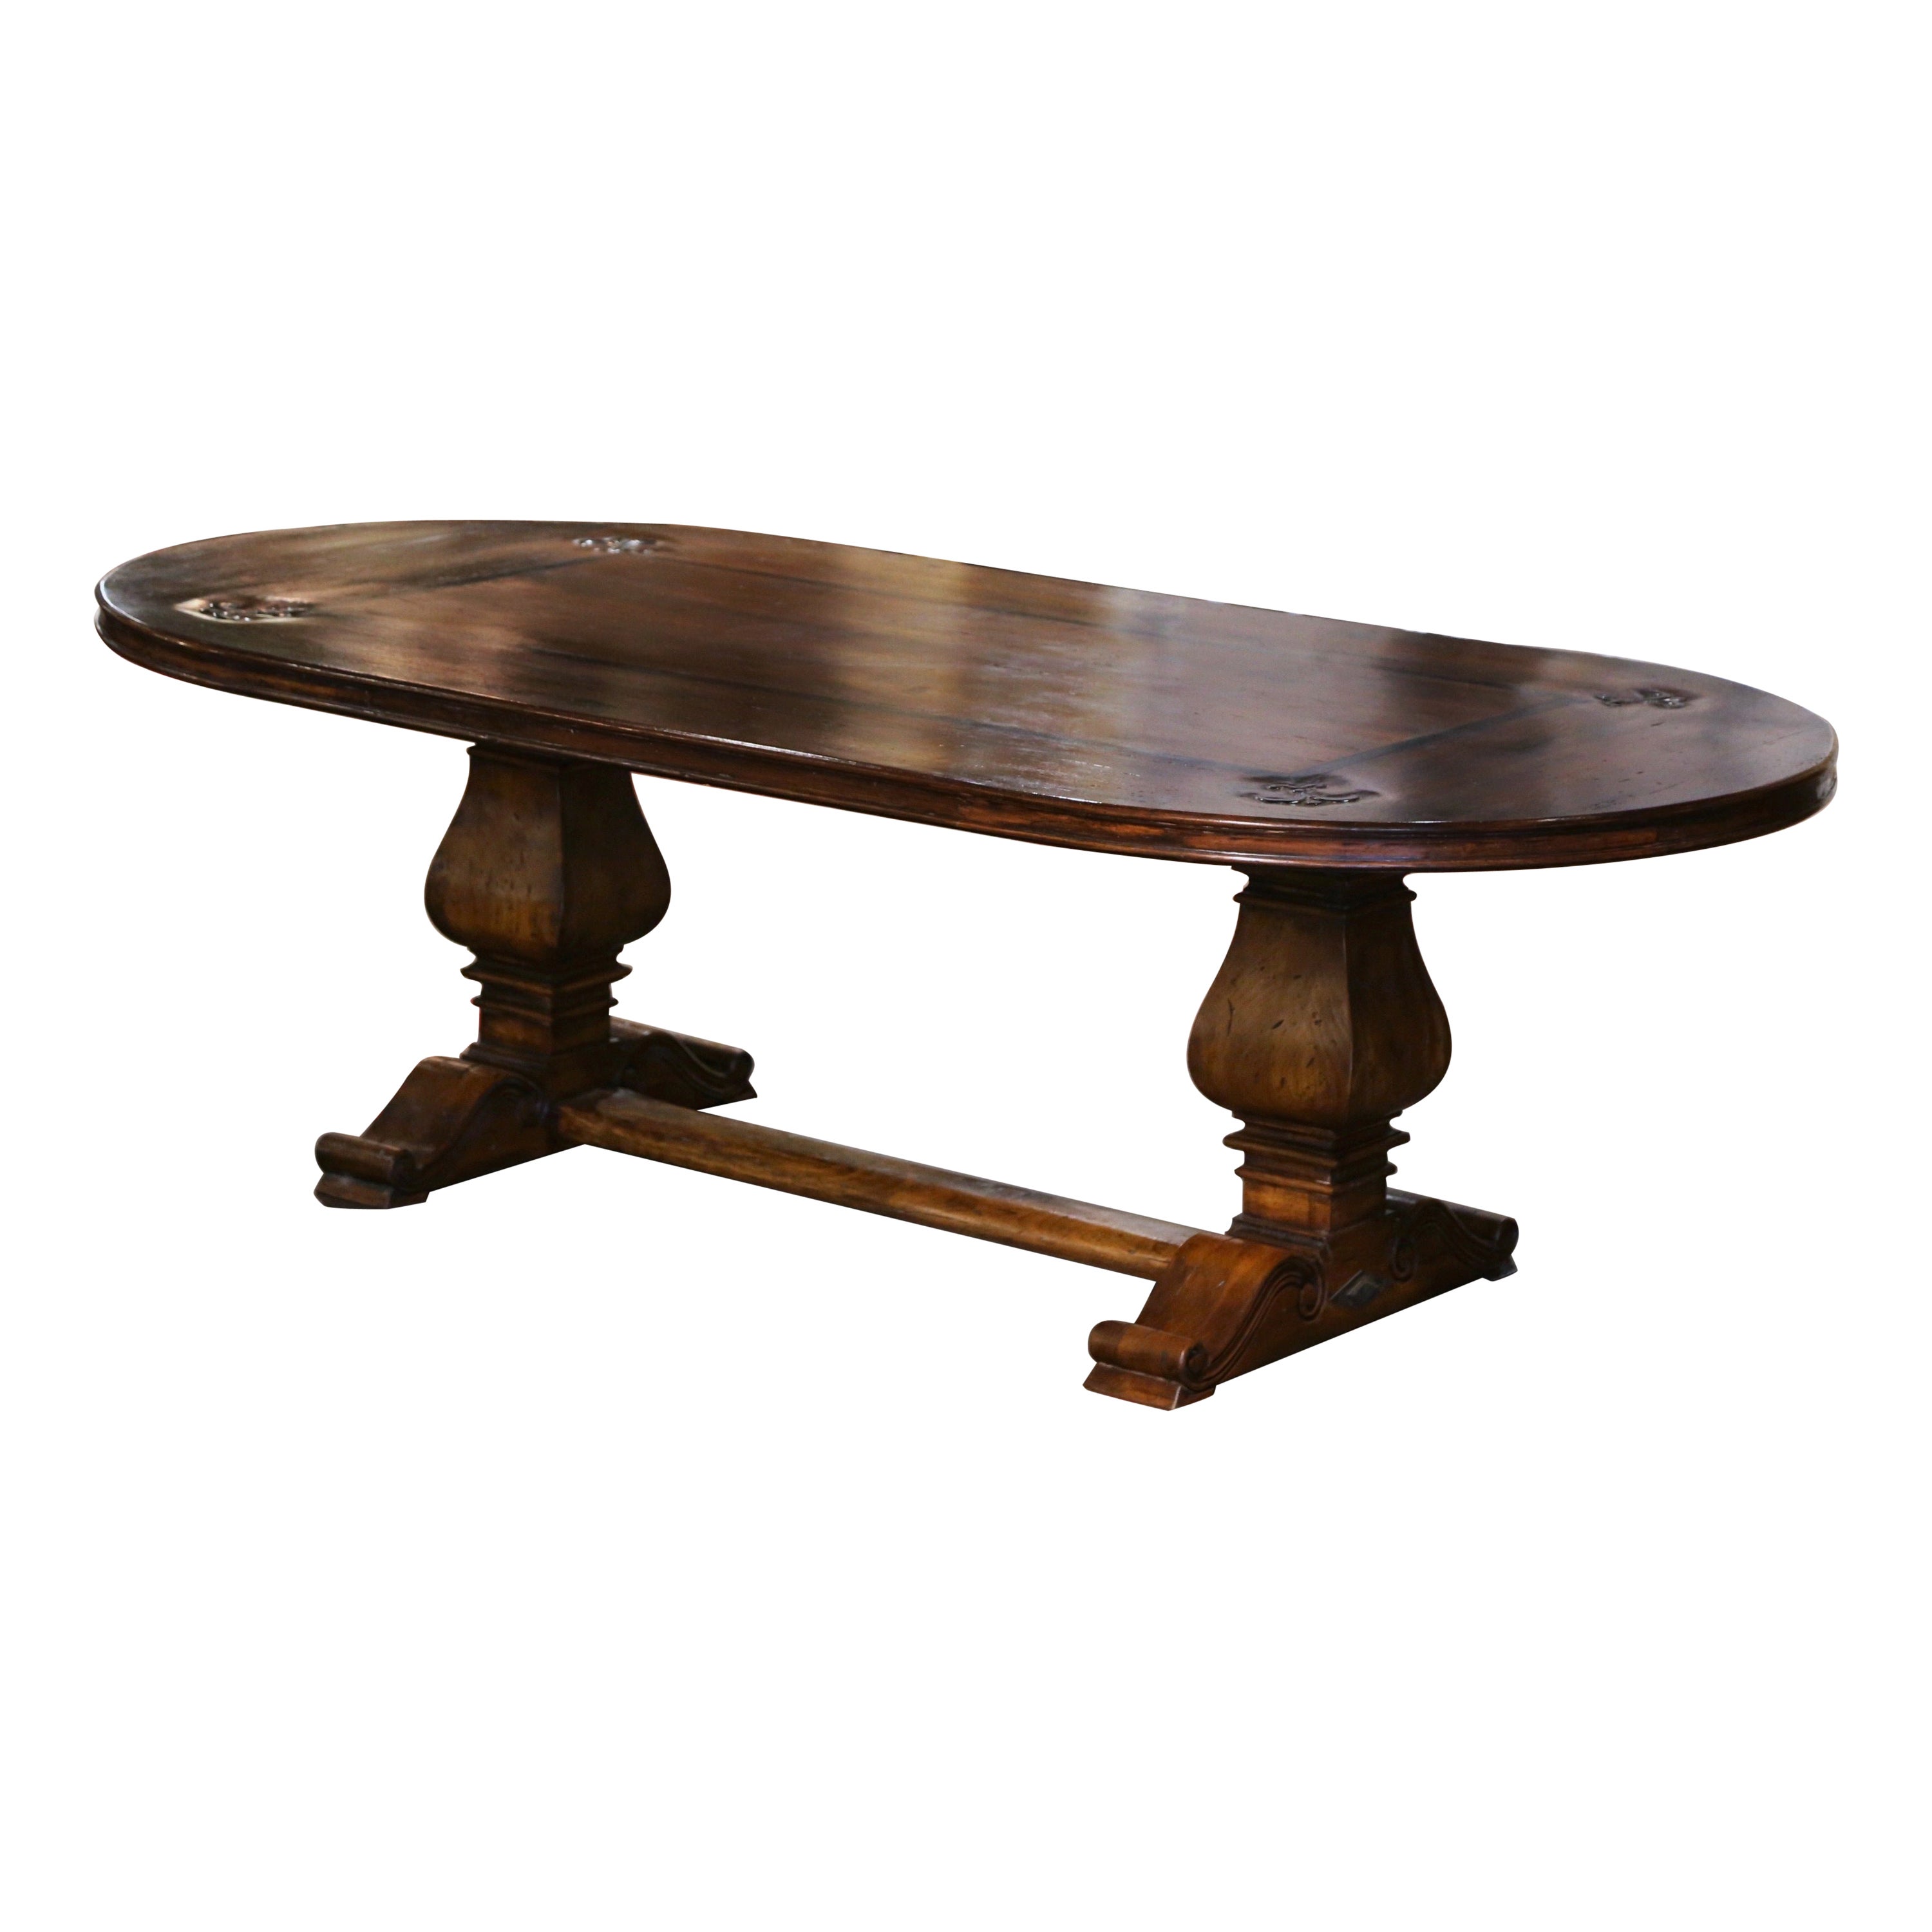 French Carved Walnut with Inlay Decor and Fleur-de-lys Trestle Dining Table For Sale